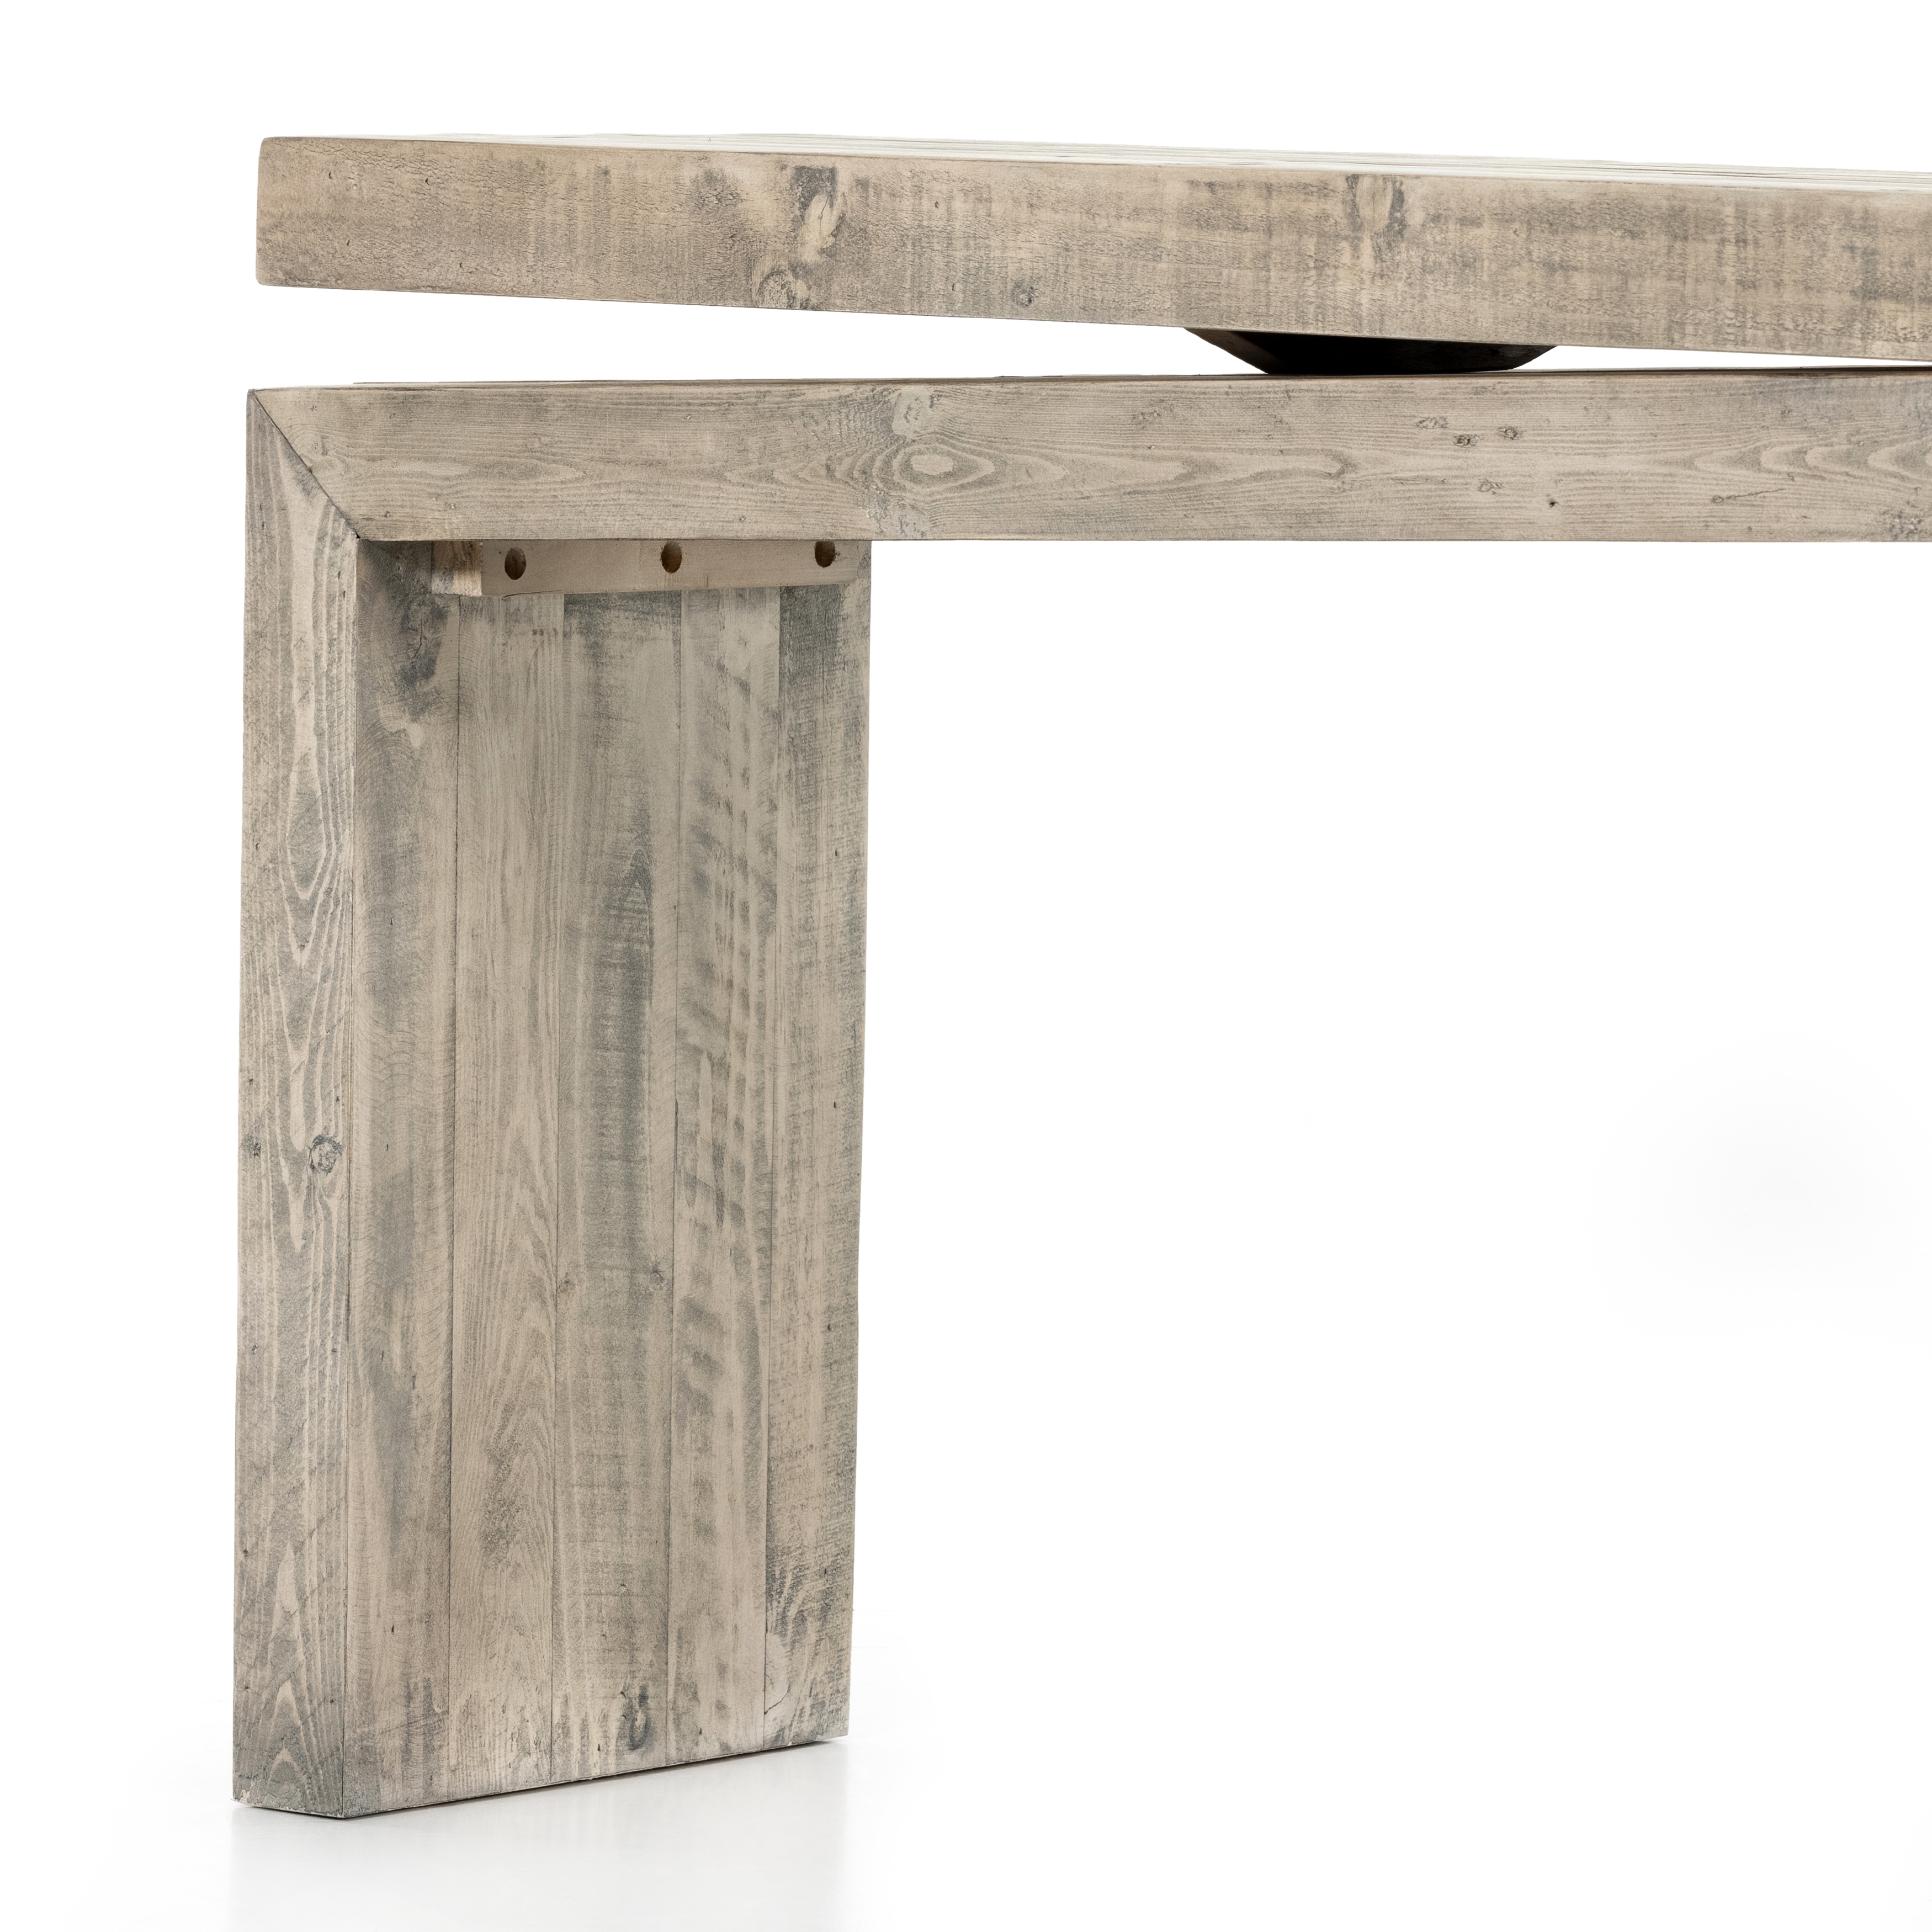 Matthes Console Table-Weathered Wheat - Image 11